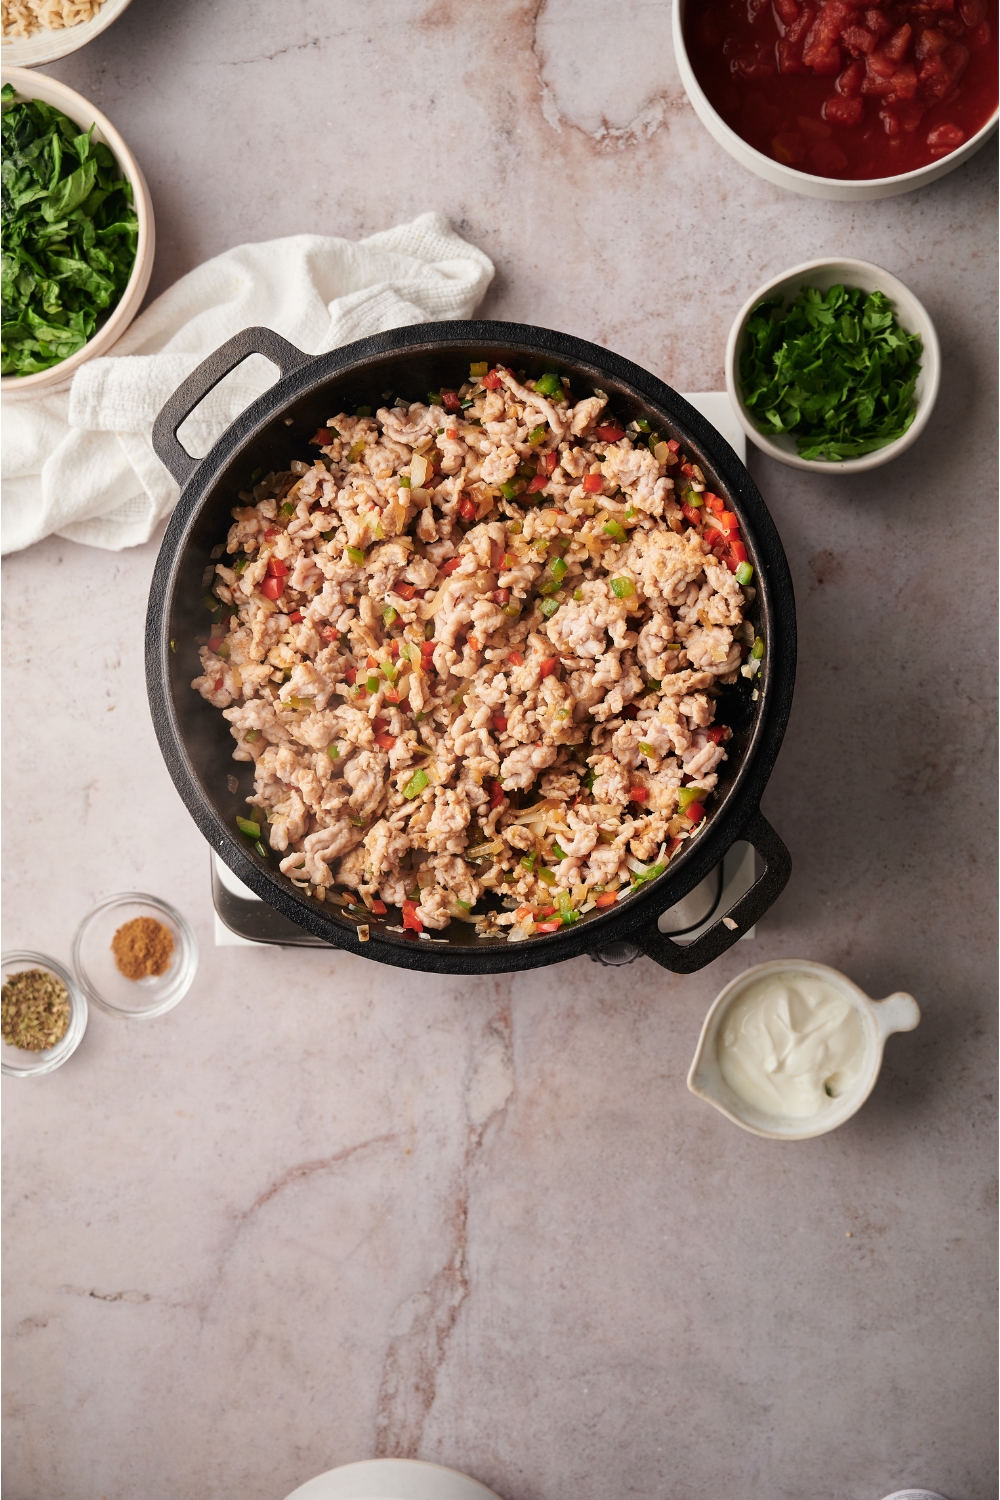 Black skillet filled with cooked ground turkey, diced peppers and diced onions. The skillet is surrounded by an assortment of ingredients.